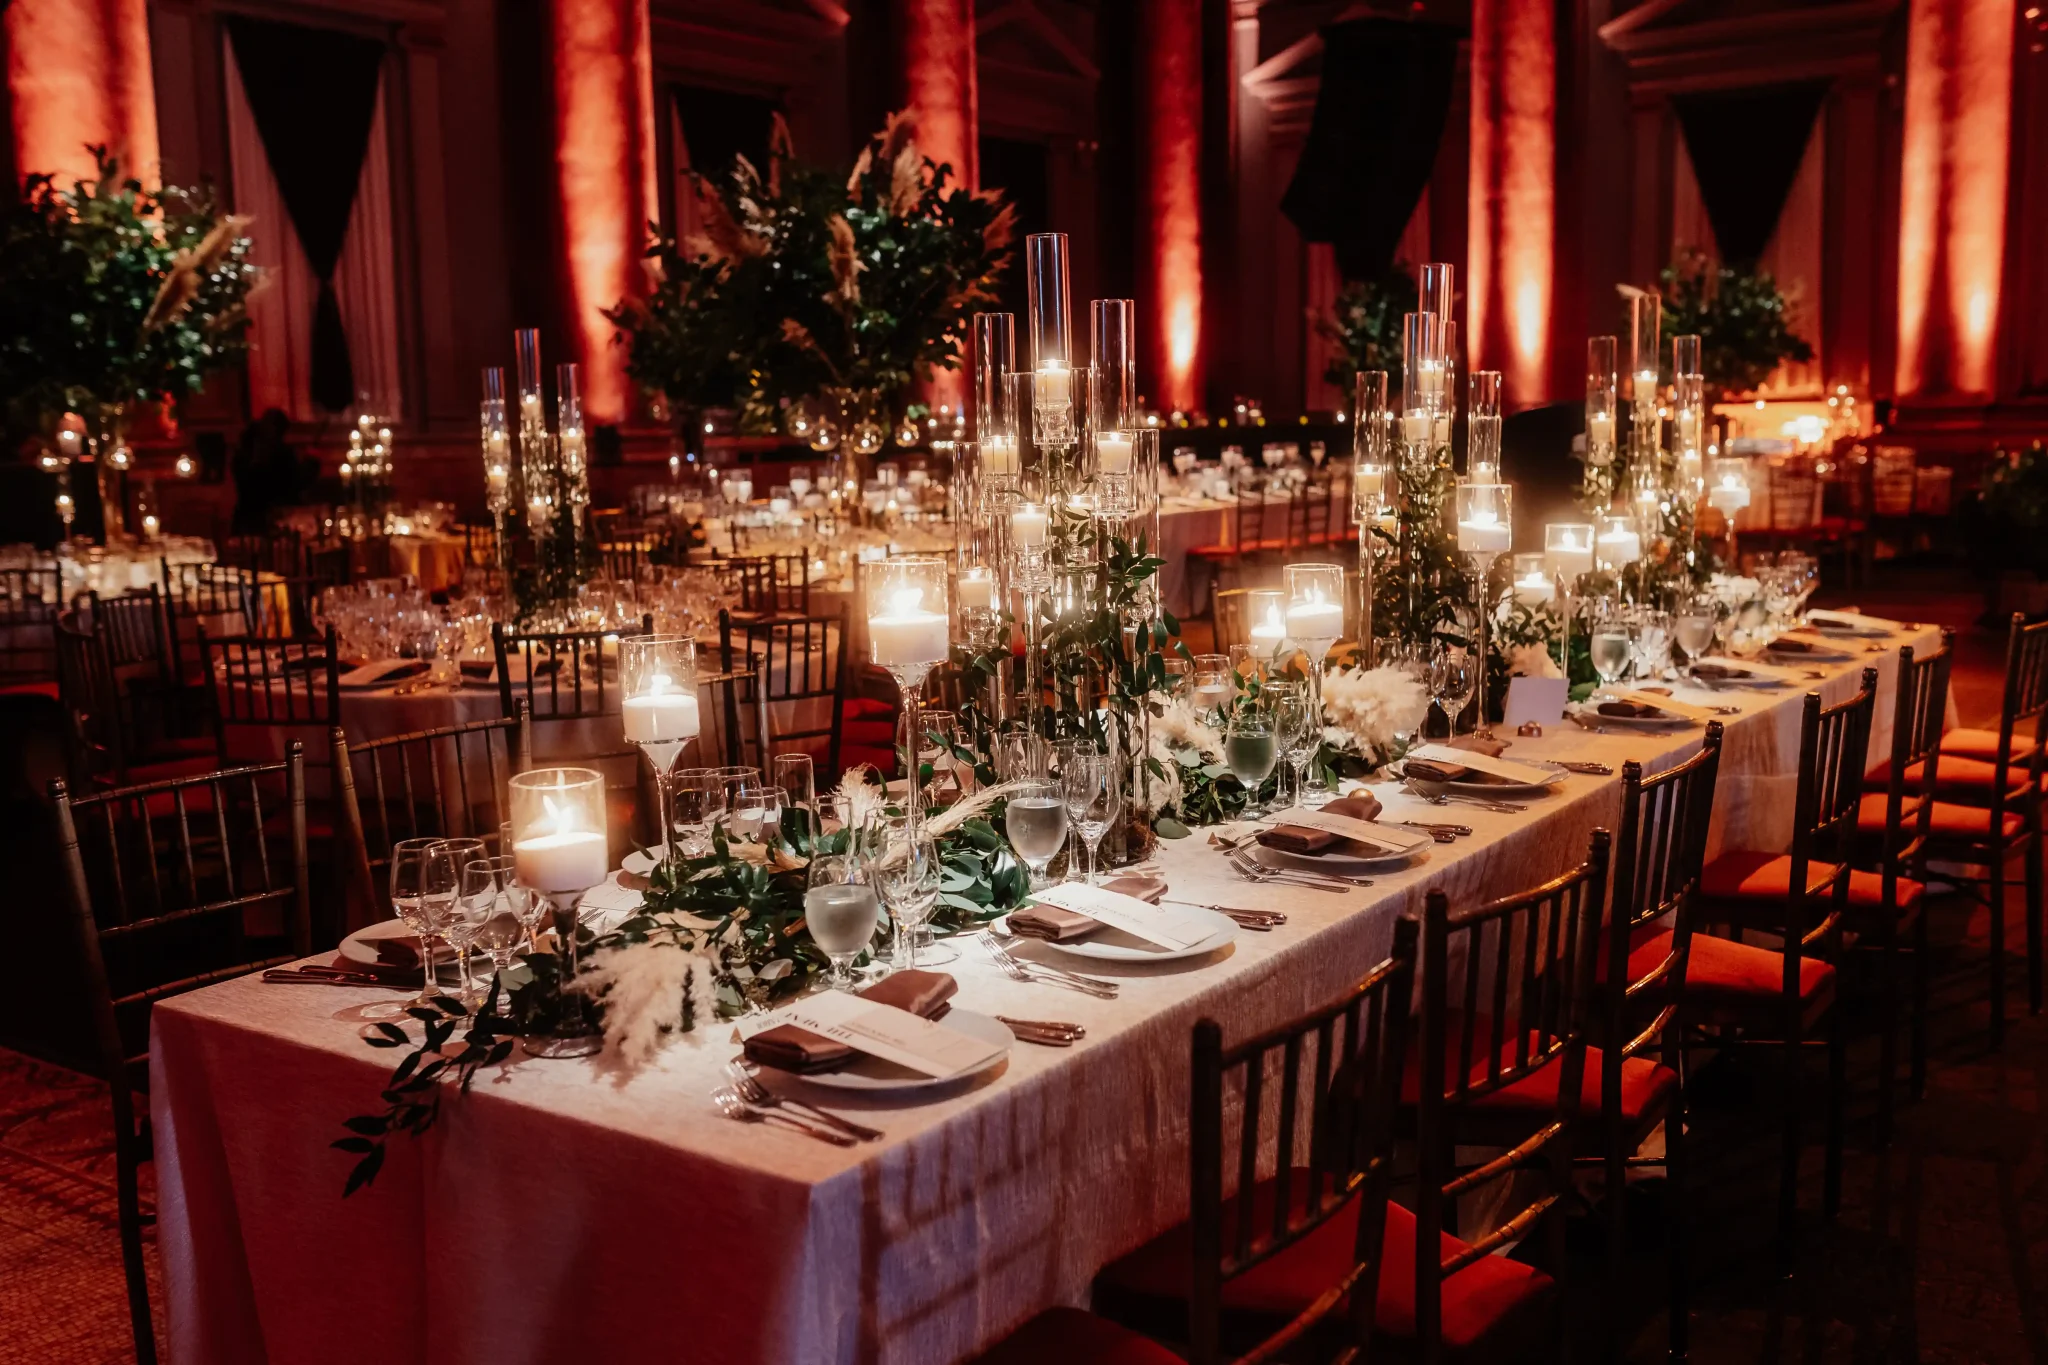 A long table with candles and greenery in a large room.